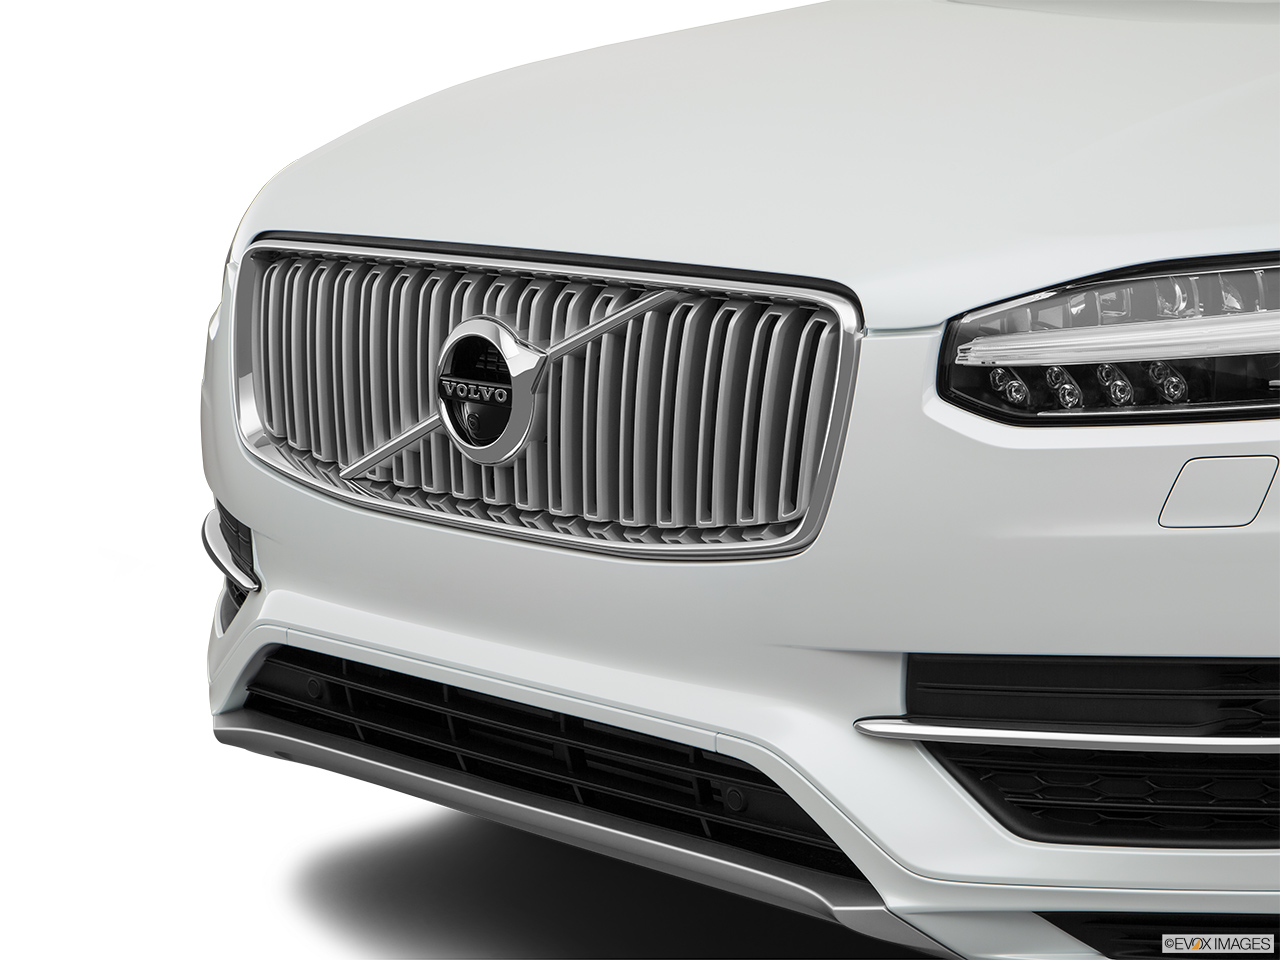 2018 Volvo XC90 T8 Inscription eAWD Plug-in Hybrid Close up of Grill. 